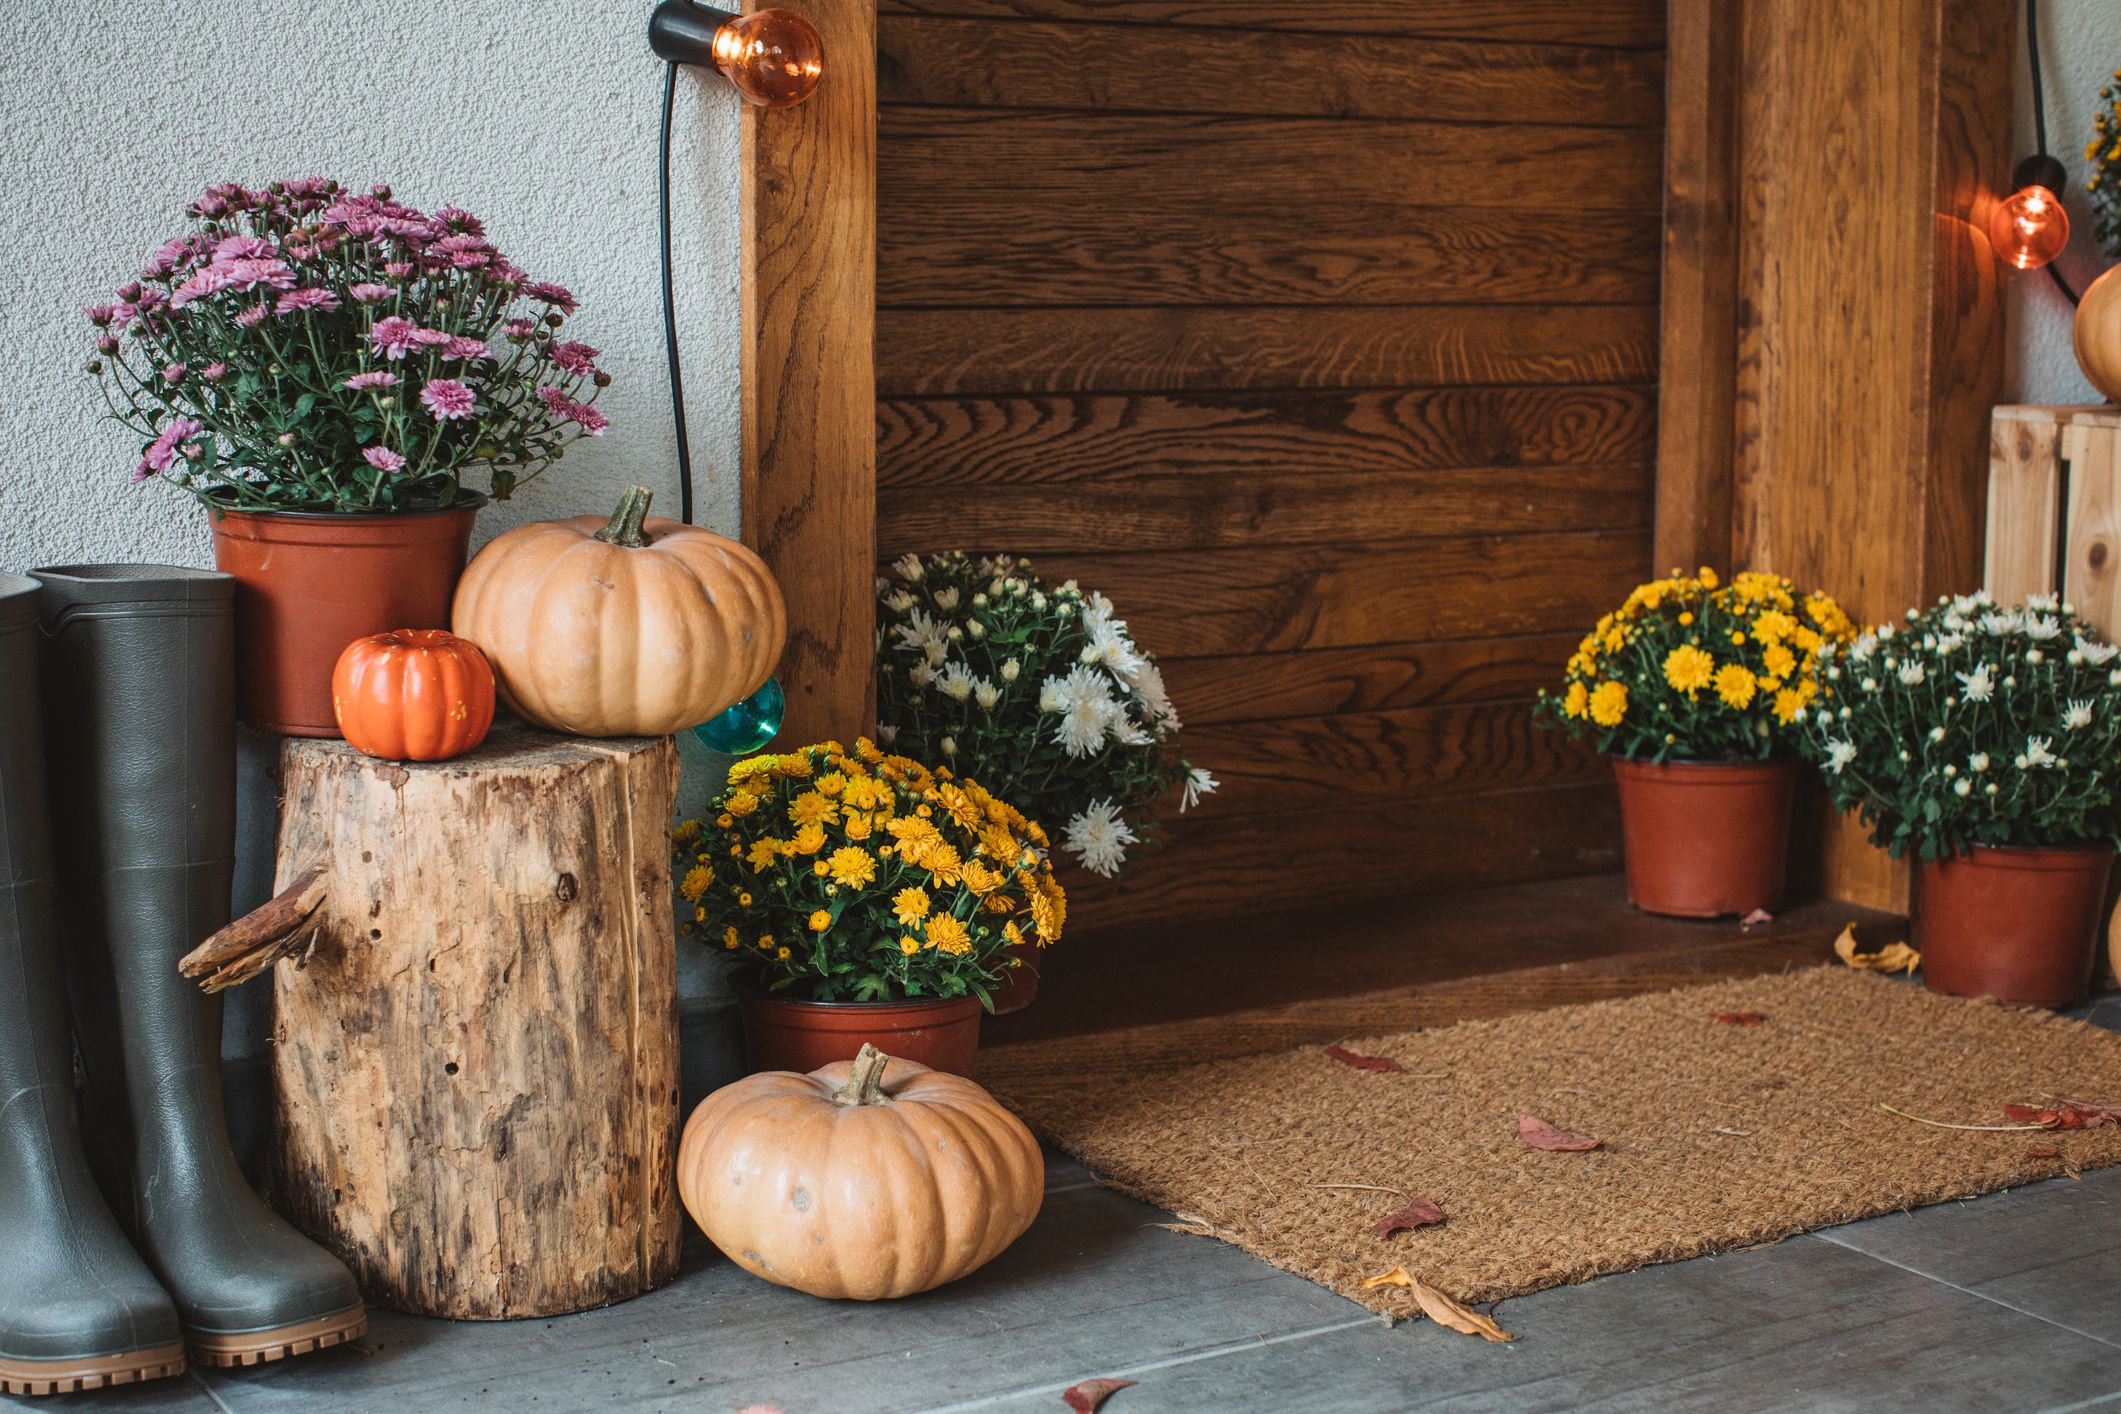 Colorful Fall Decorating Ideas for Porches, Patios, and Yards